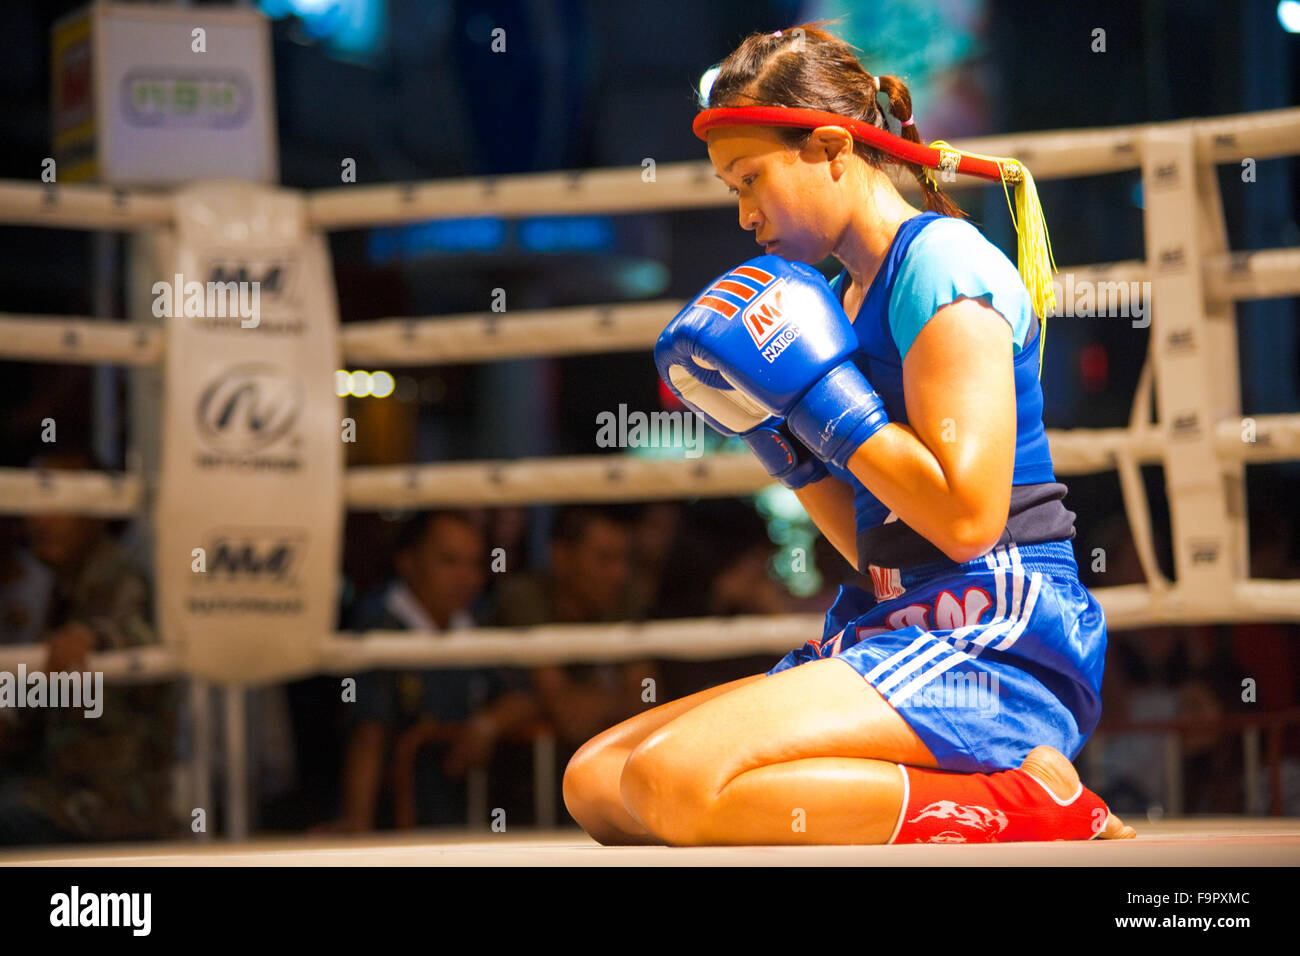 Female muay thai fighter kneeling, gloves raised, reflecting in a kickboxing ritual called the wai khru meant to honor teachers Stock Photo